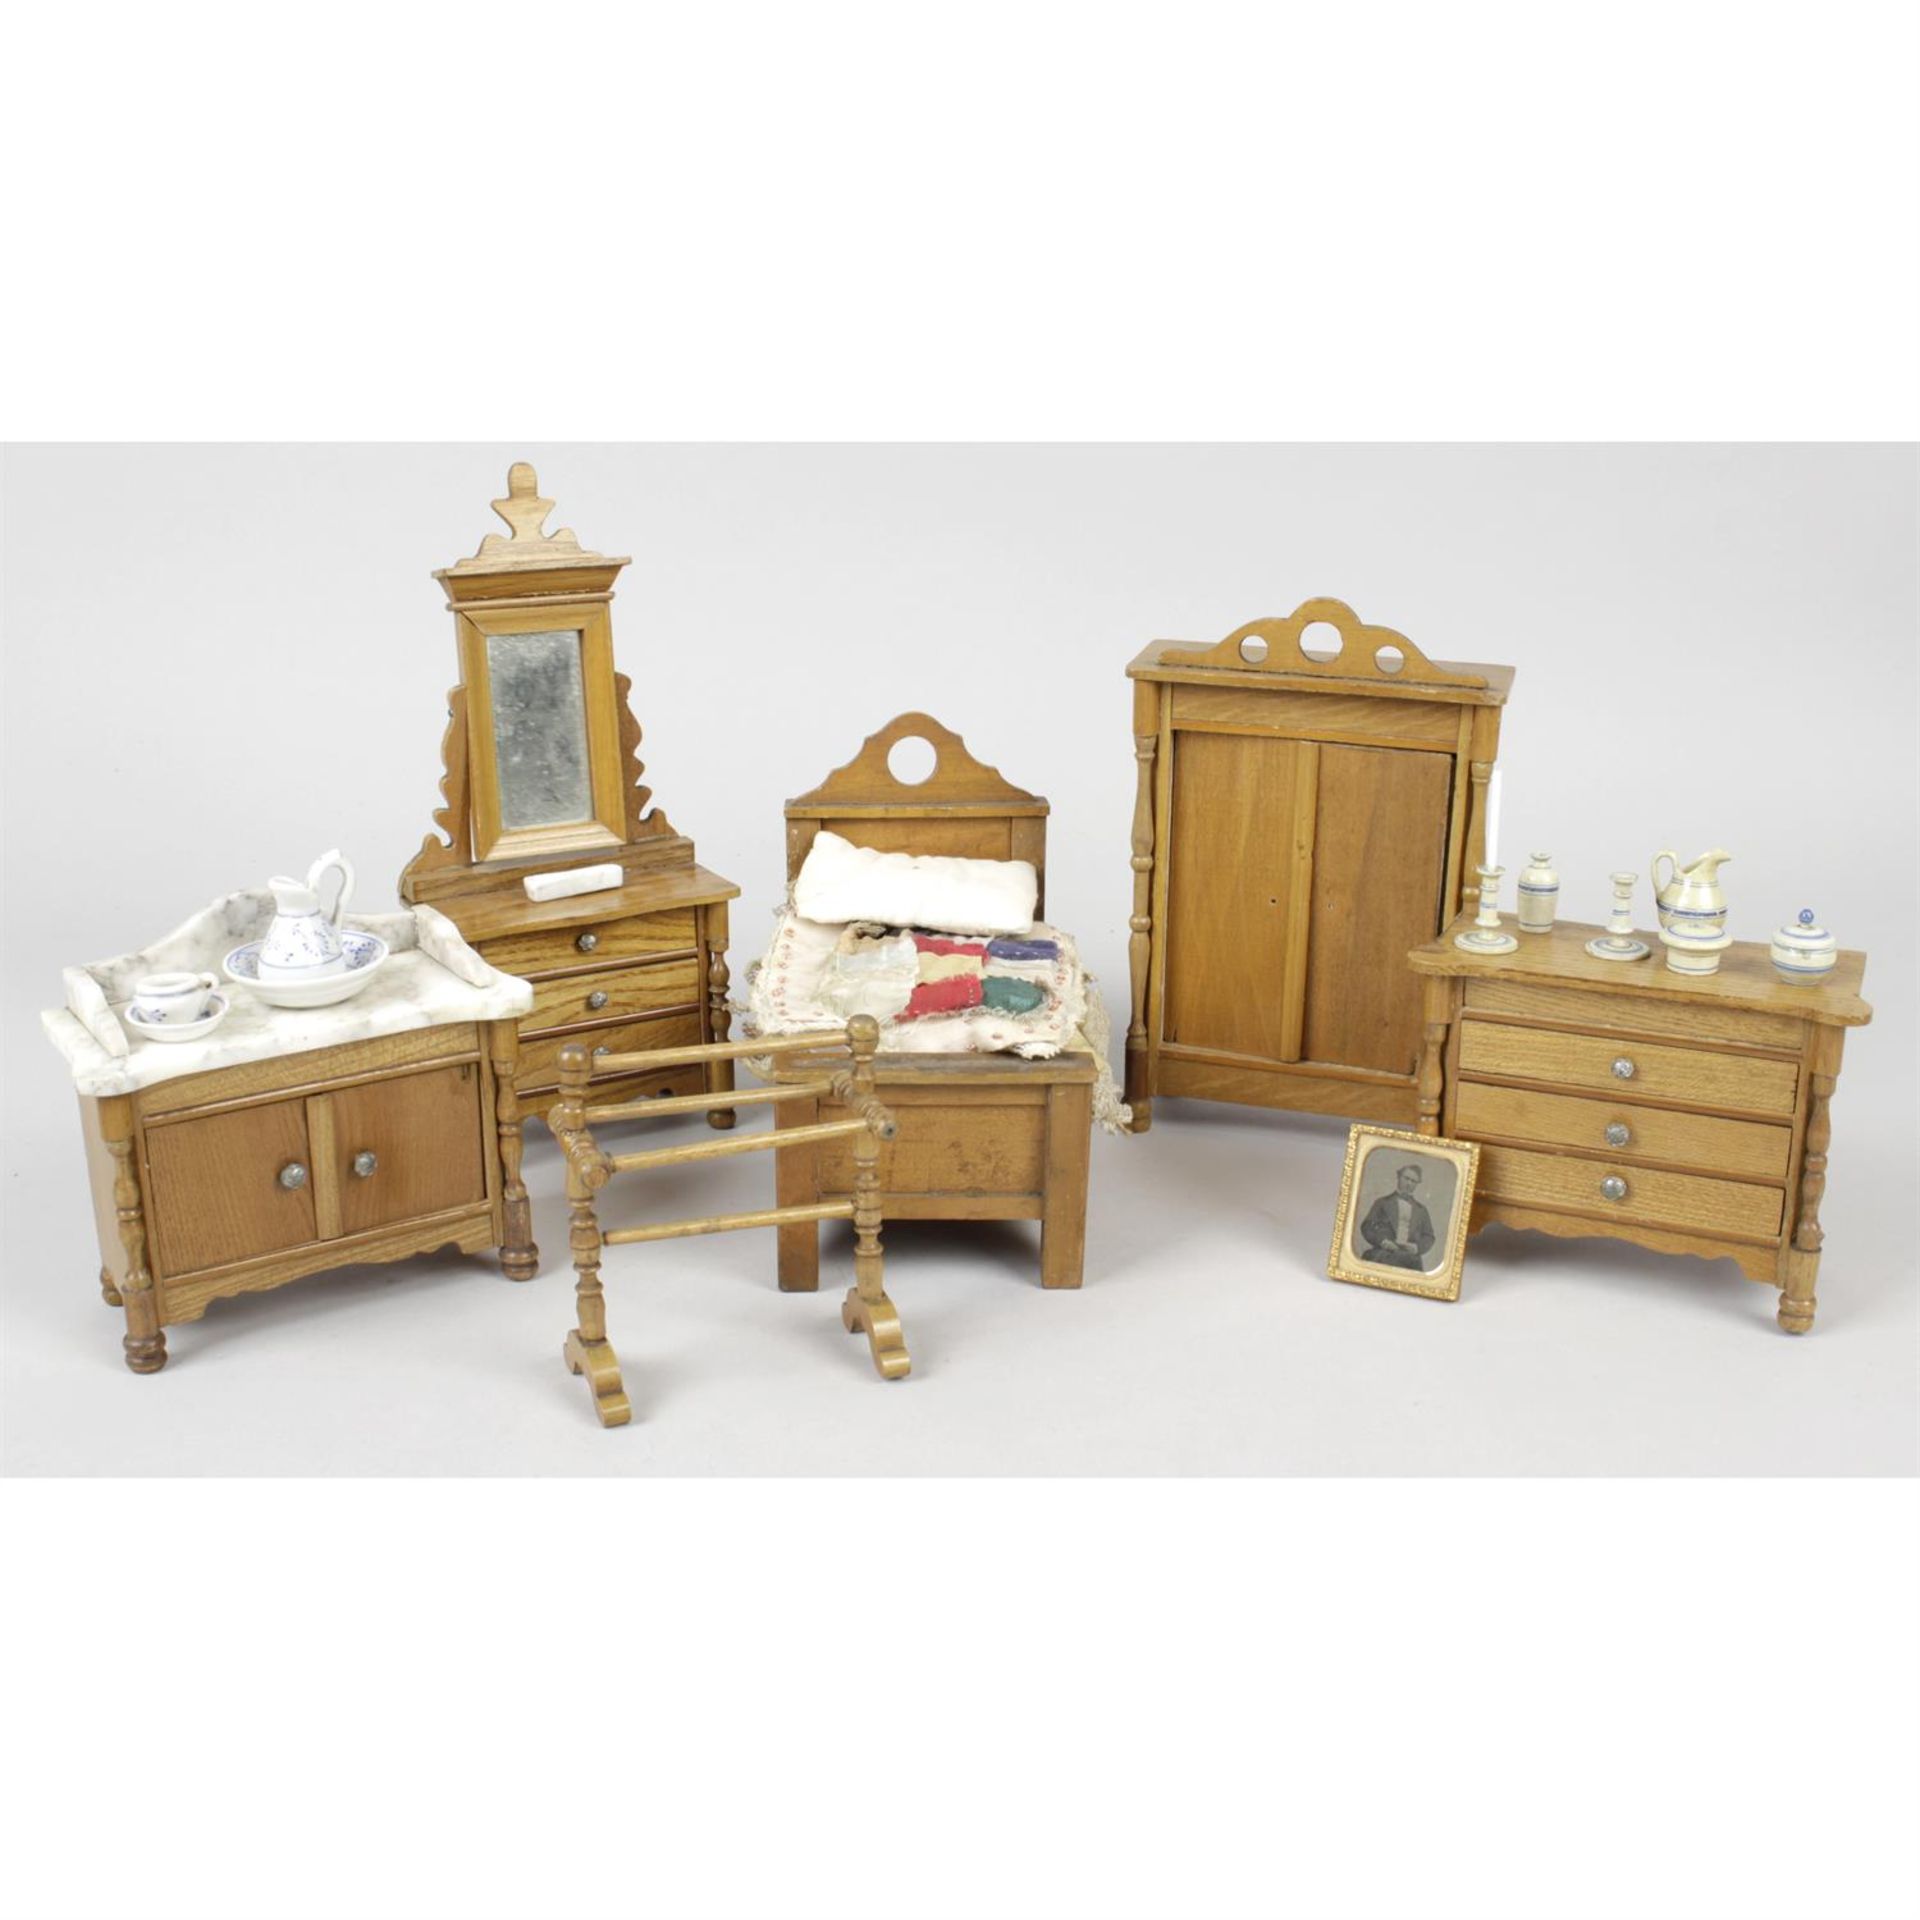 A large late 19th century painted wooden dolls house with miniature furniture and contents. - Bild 2 aus 14